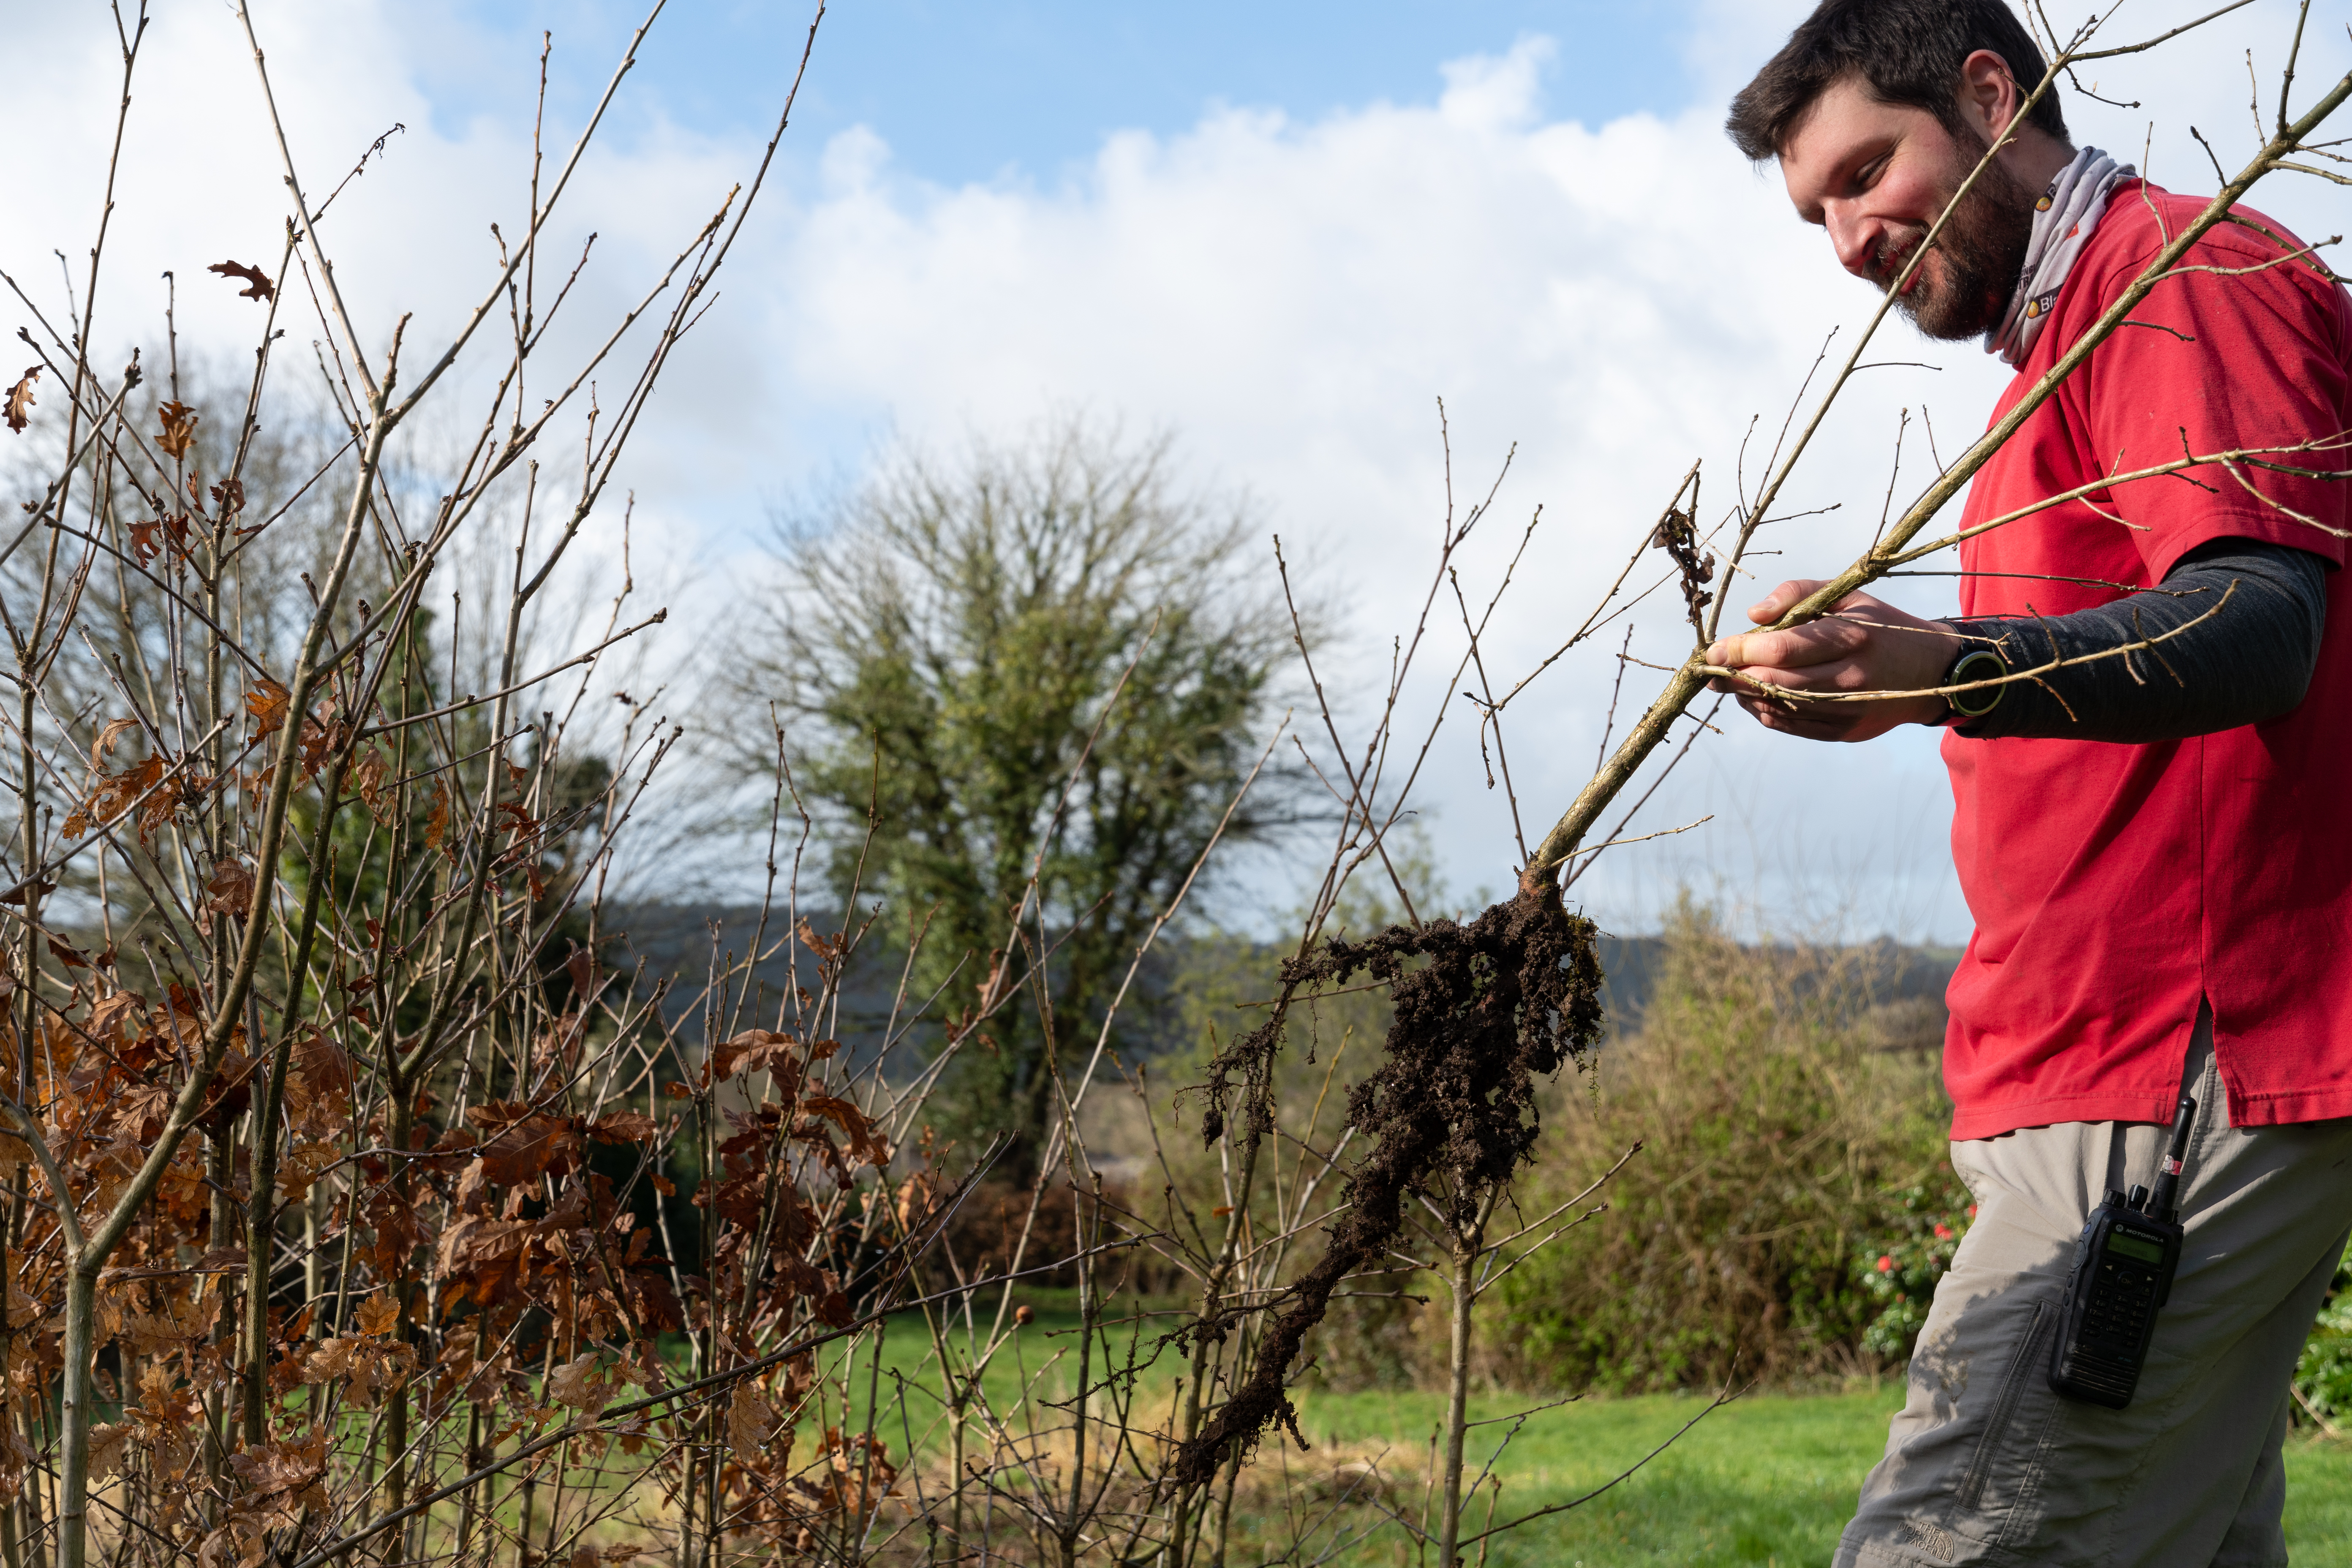 Ranger Steve De'ath lifts a young oak tree grown from acorns collected on site for a new hedge at Buckland Abbey, Devon